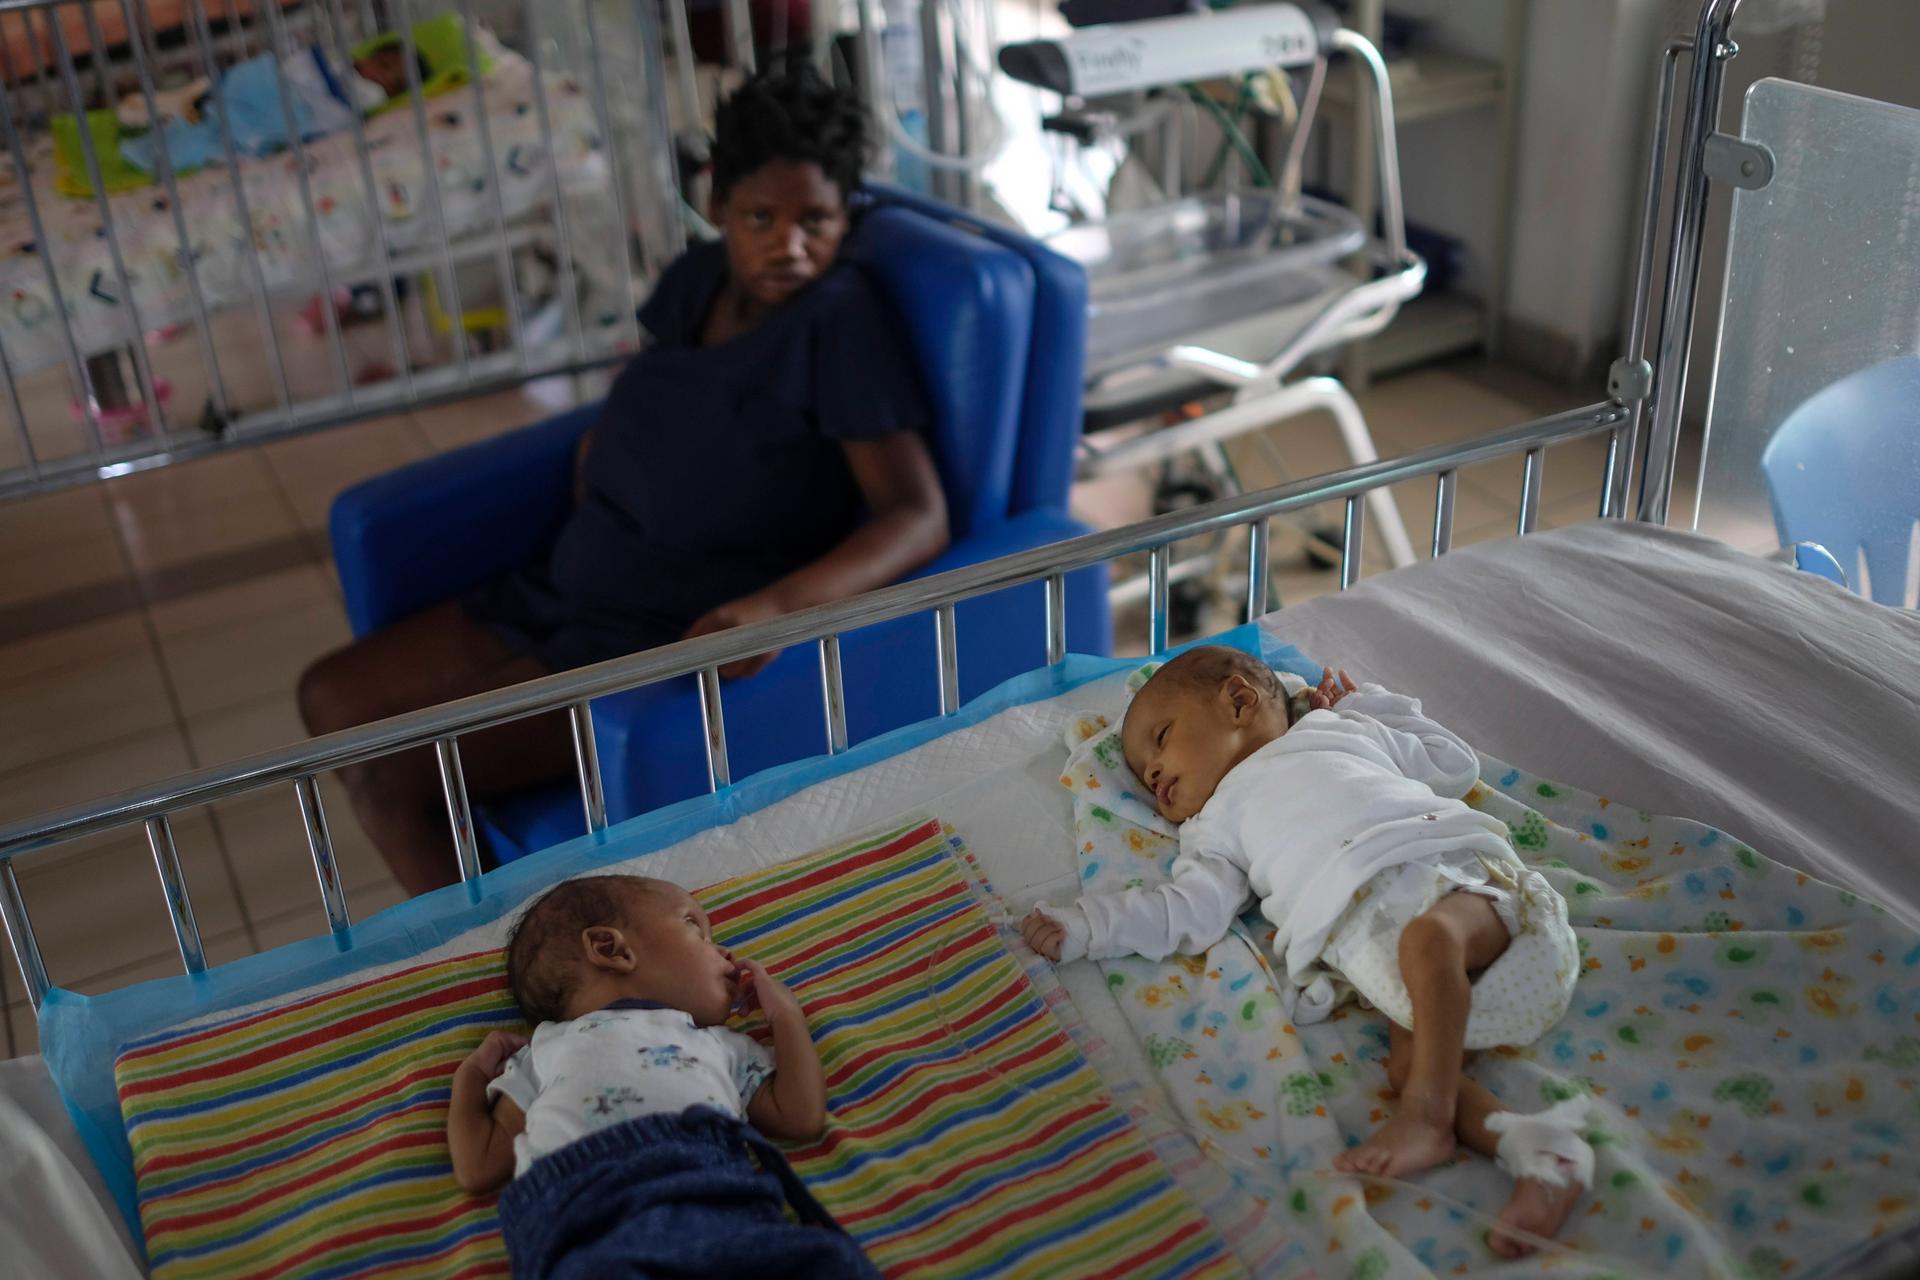 Twins rest on a bed at the Saint Damien Pediatric Hospital of Port-au-Prince, Haiti, on Oct. 24, 2021. Haiti's capital has been brought to the brink of exhaustion by fuel shortages and the capital's main pediatrics hospital says it has only three days of